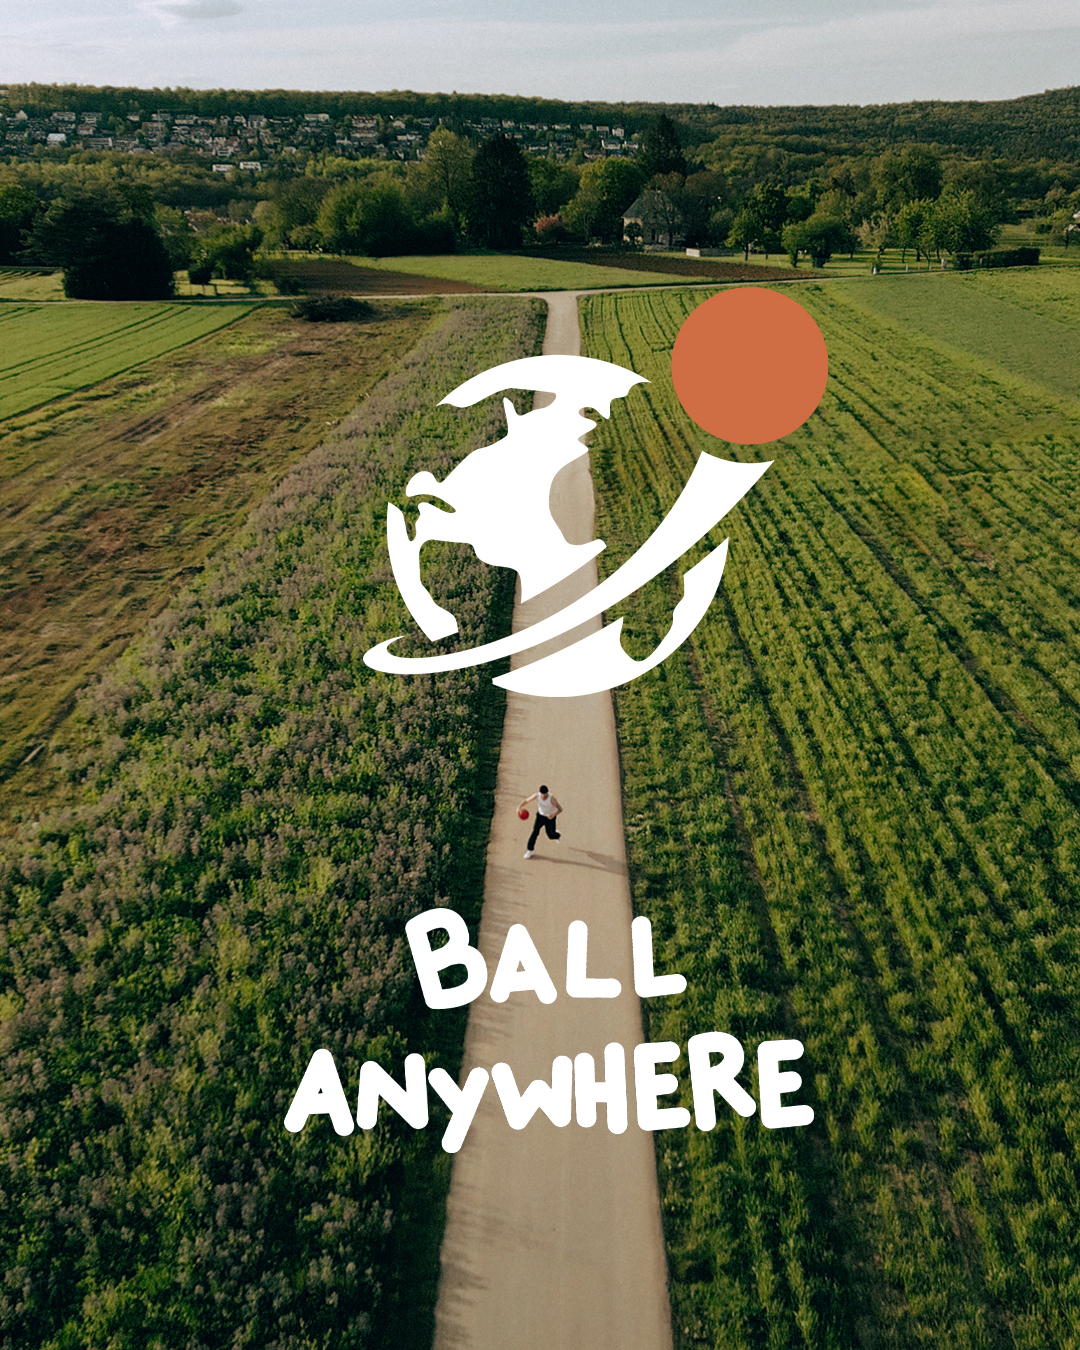 Man dribbling a ball somewhere in a field